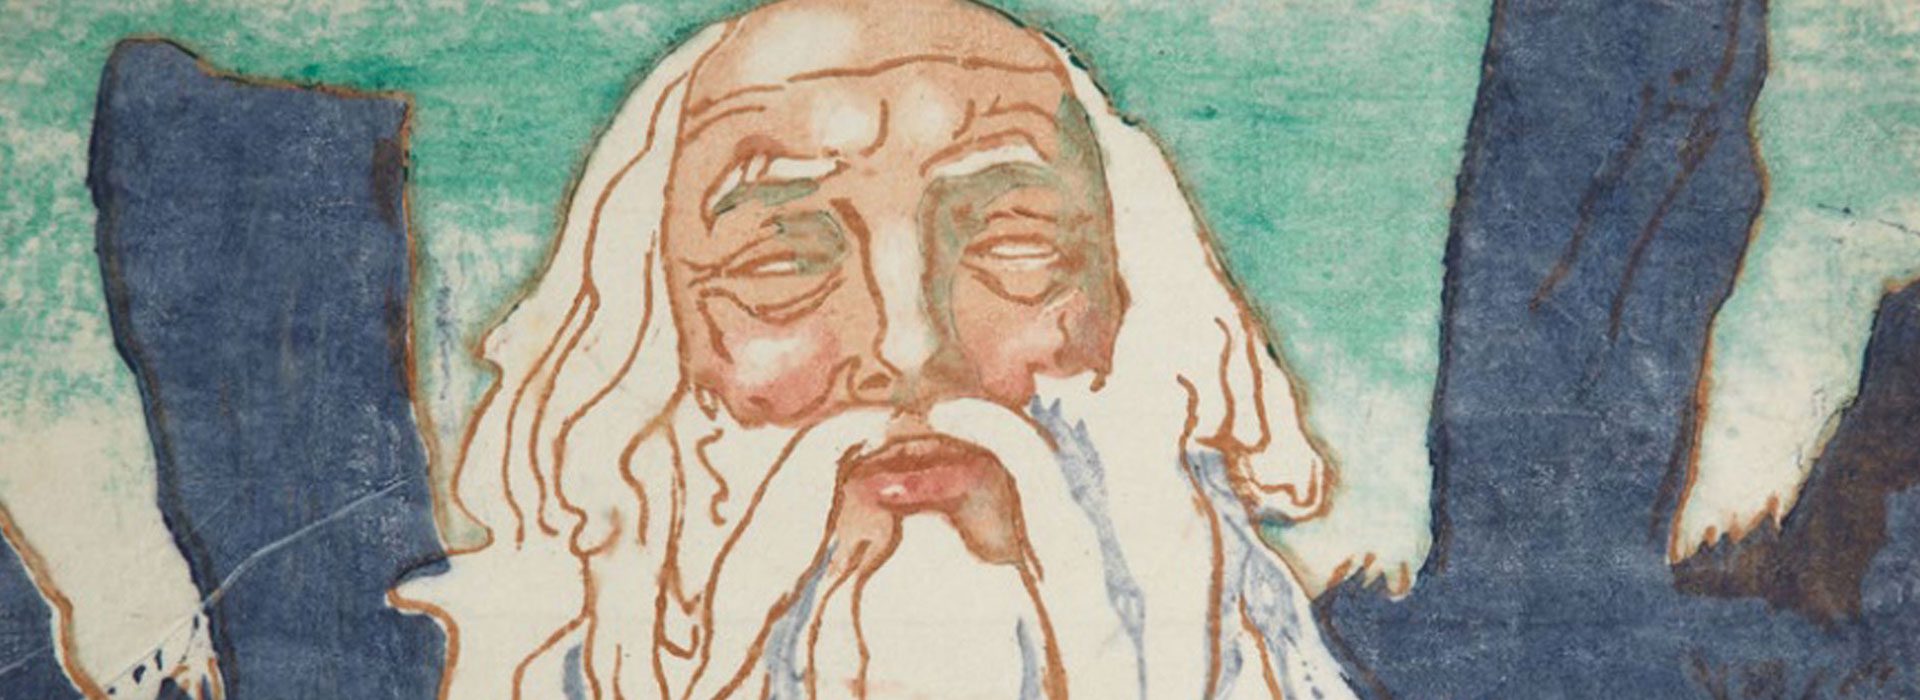 Painting of a man with a white beard